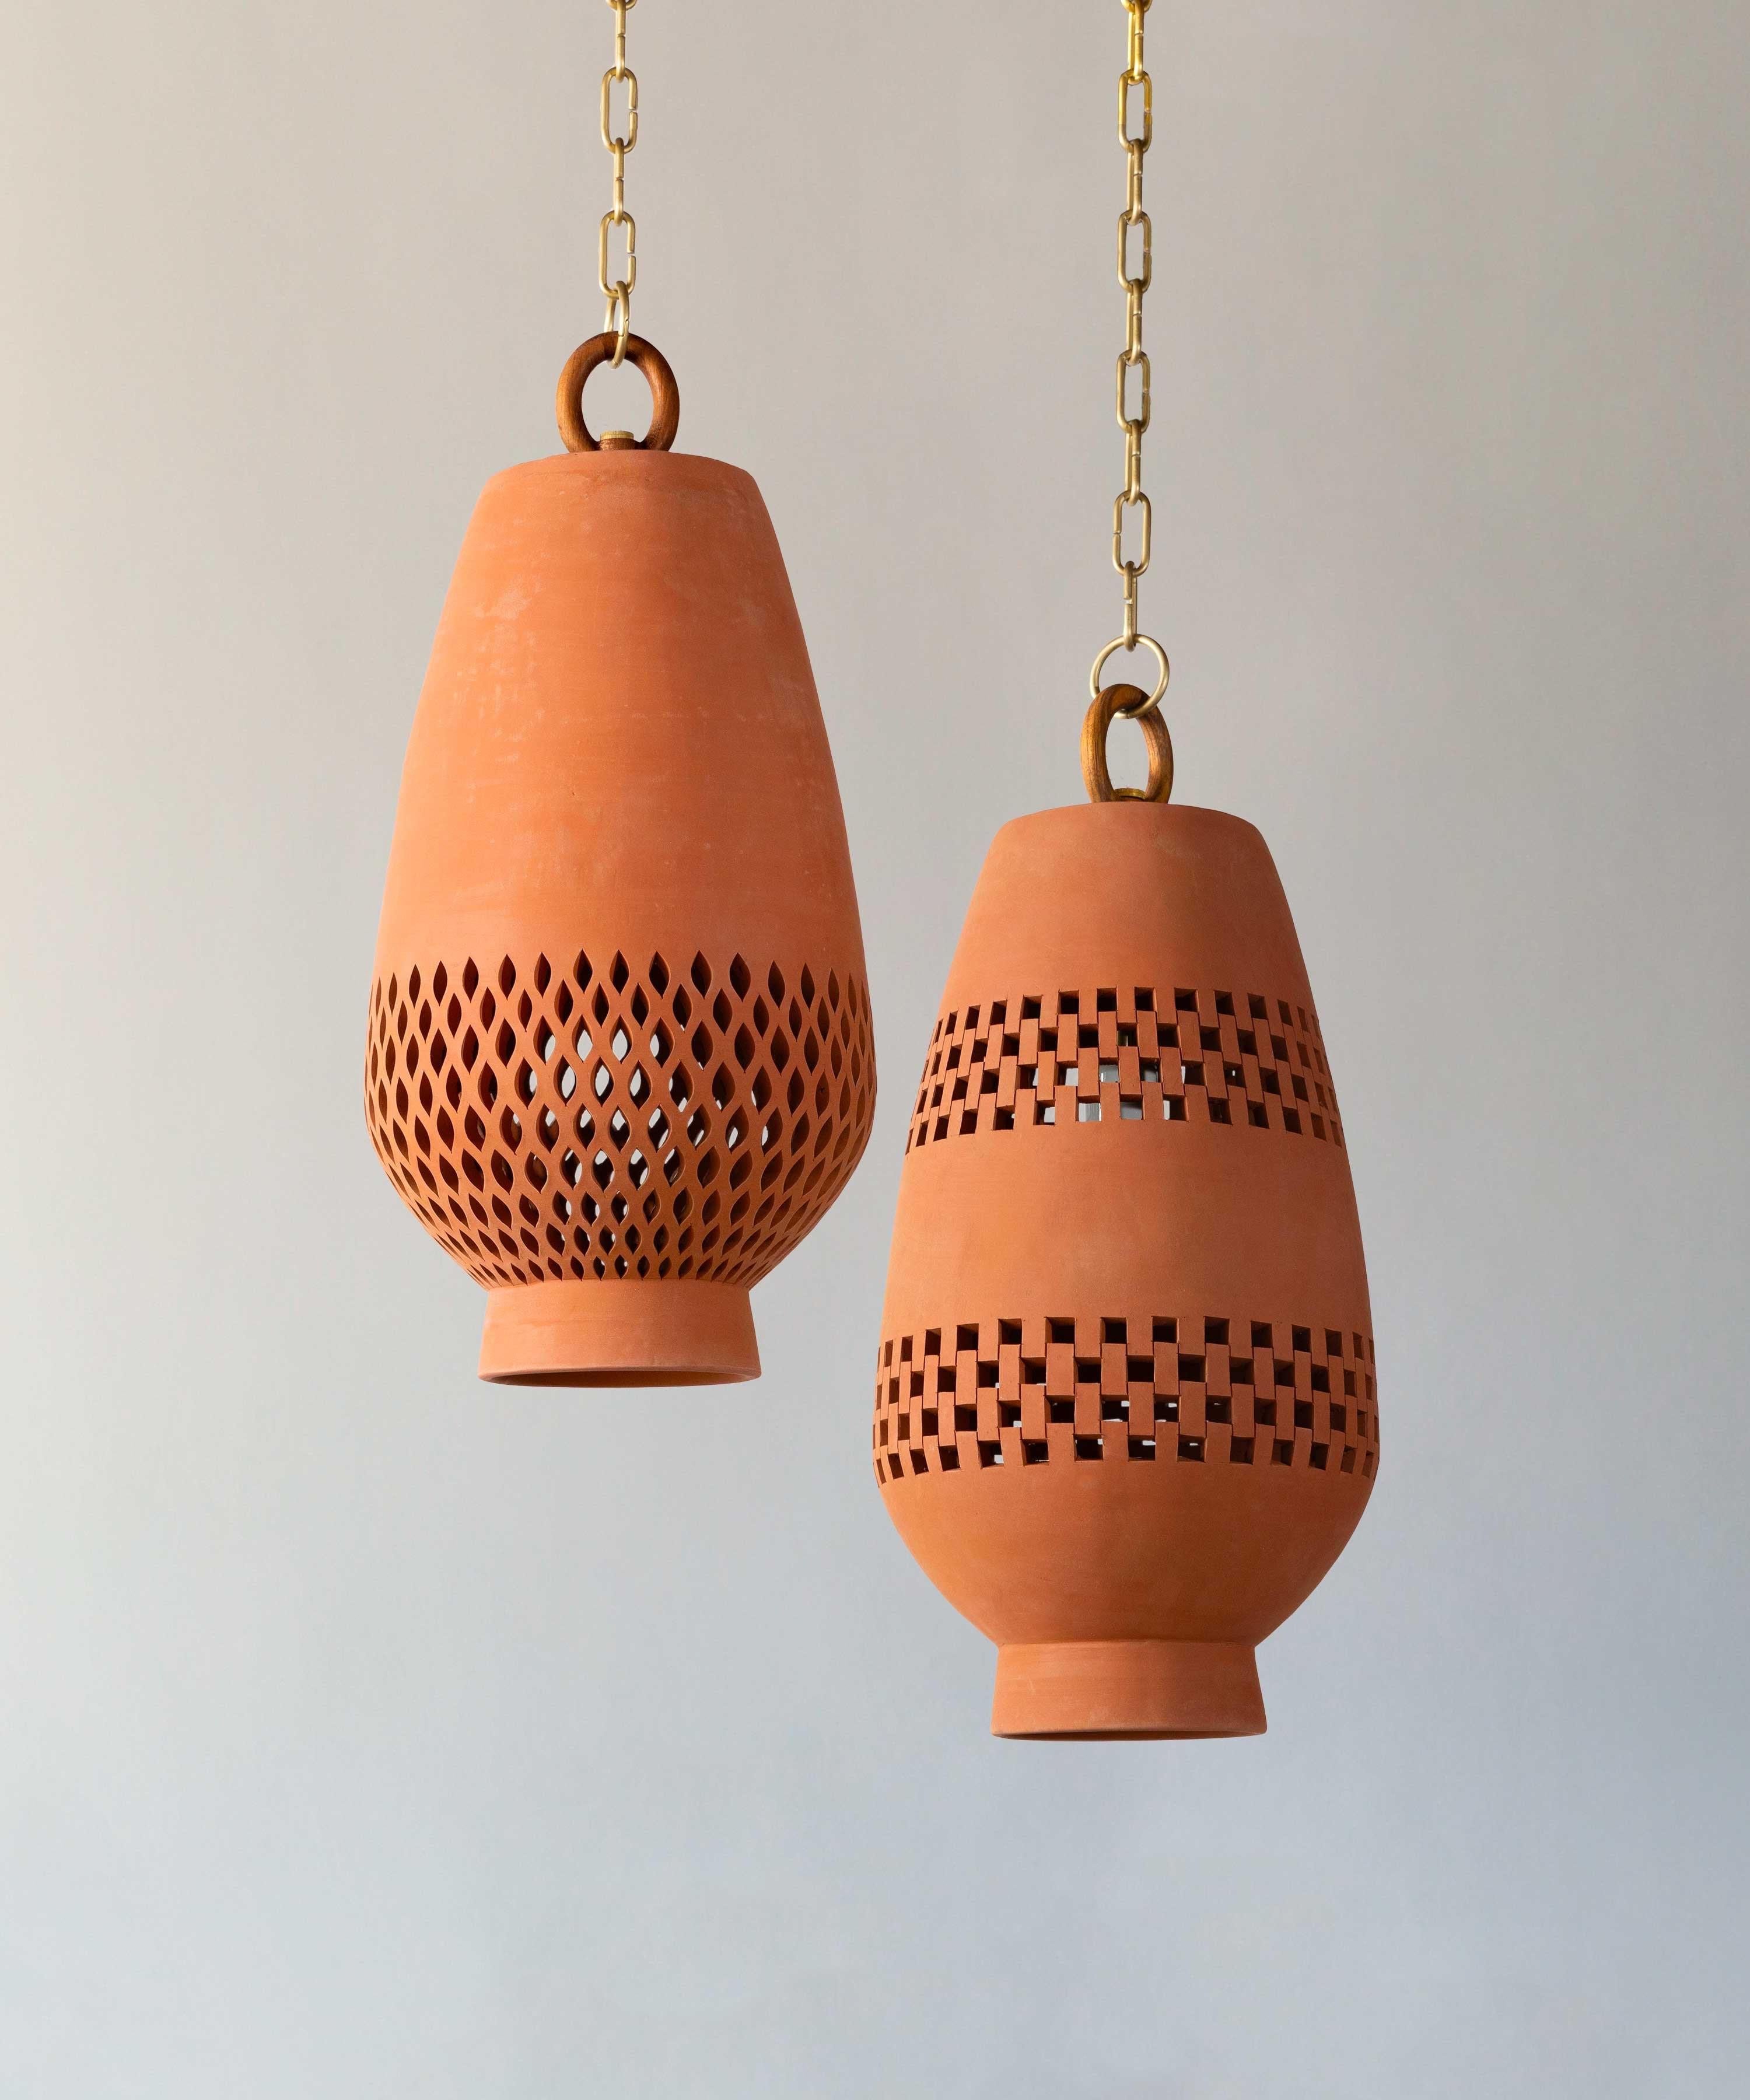 Hand-Crafted Terracotta Ceramic Pendant Light XL, Oiled Bronze, Ajedrez Atzompa Collection For Sale